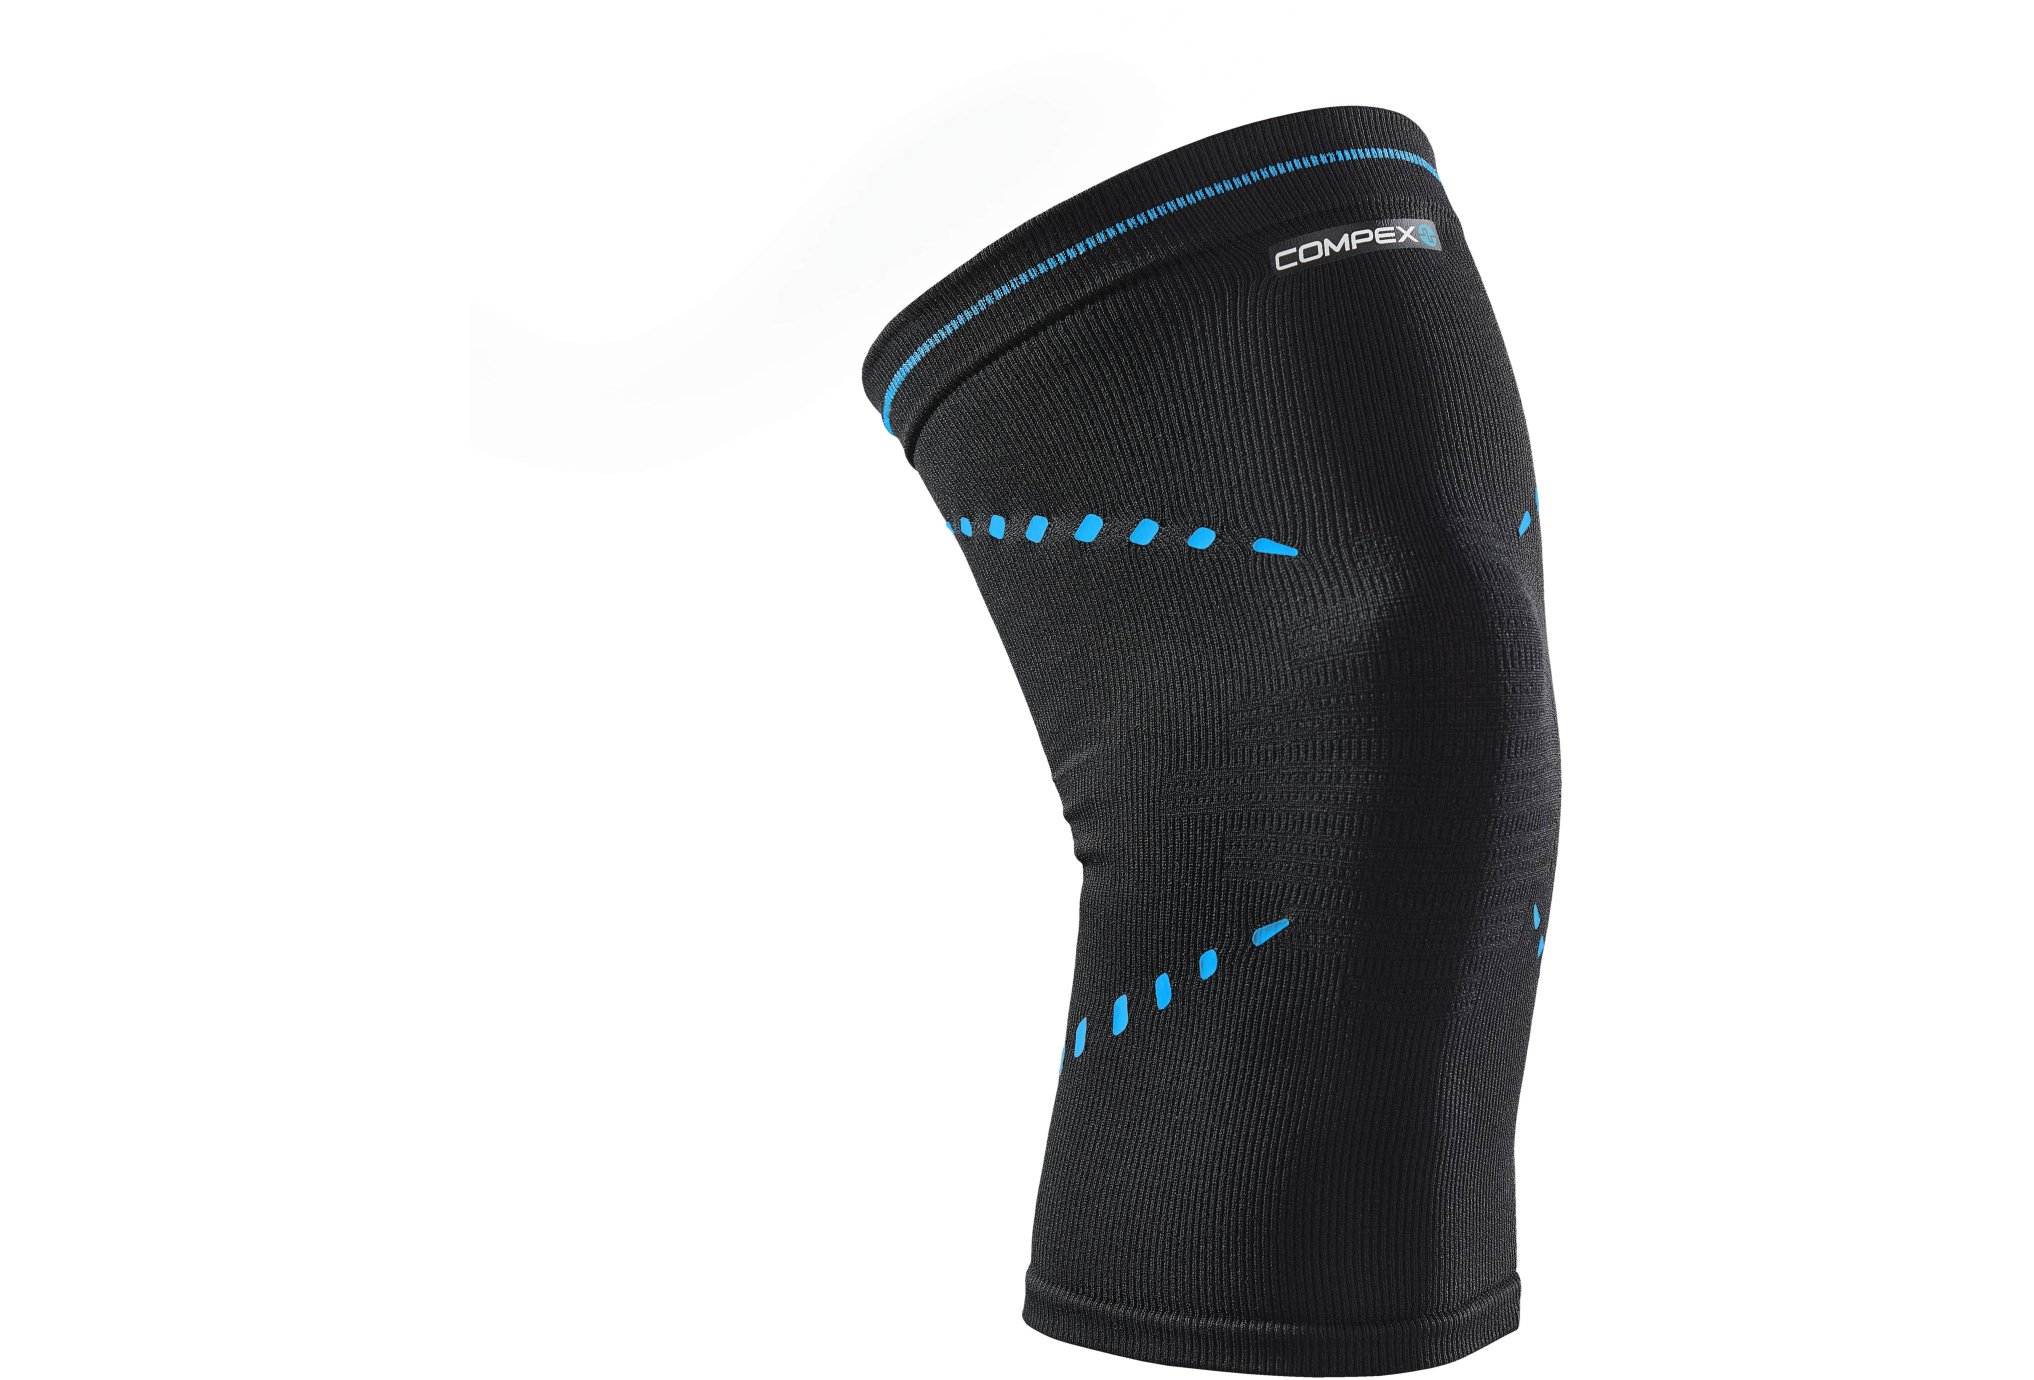 Compex Activ Knee Protection musculaire & articulaire